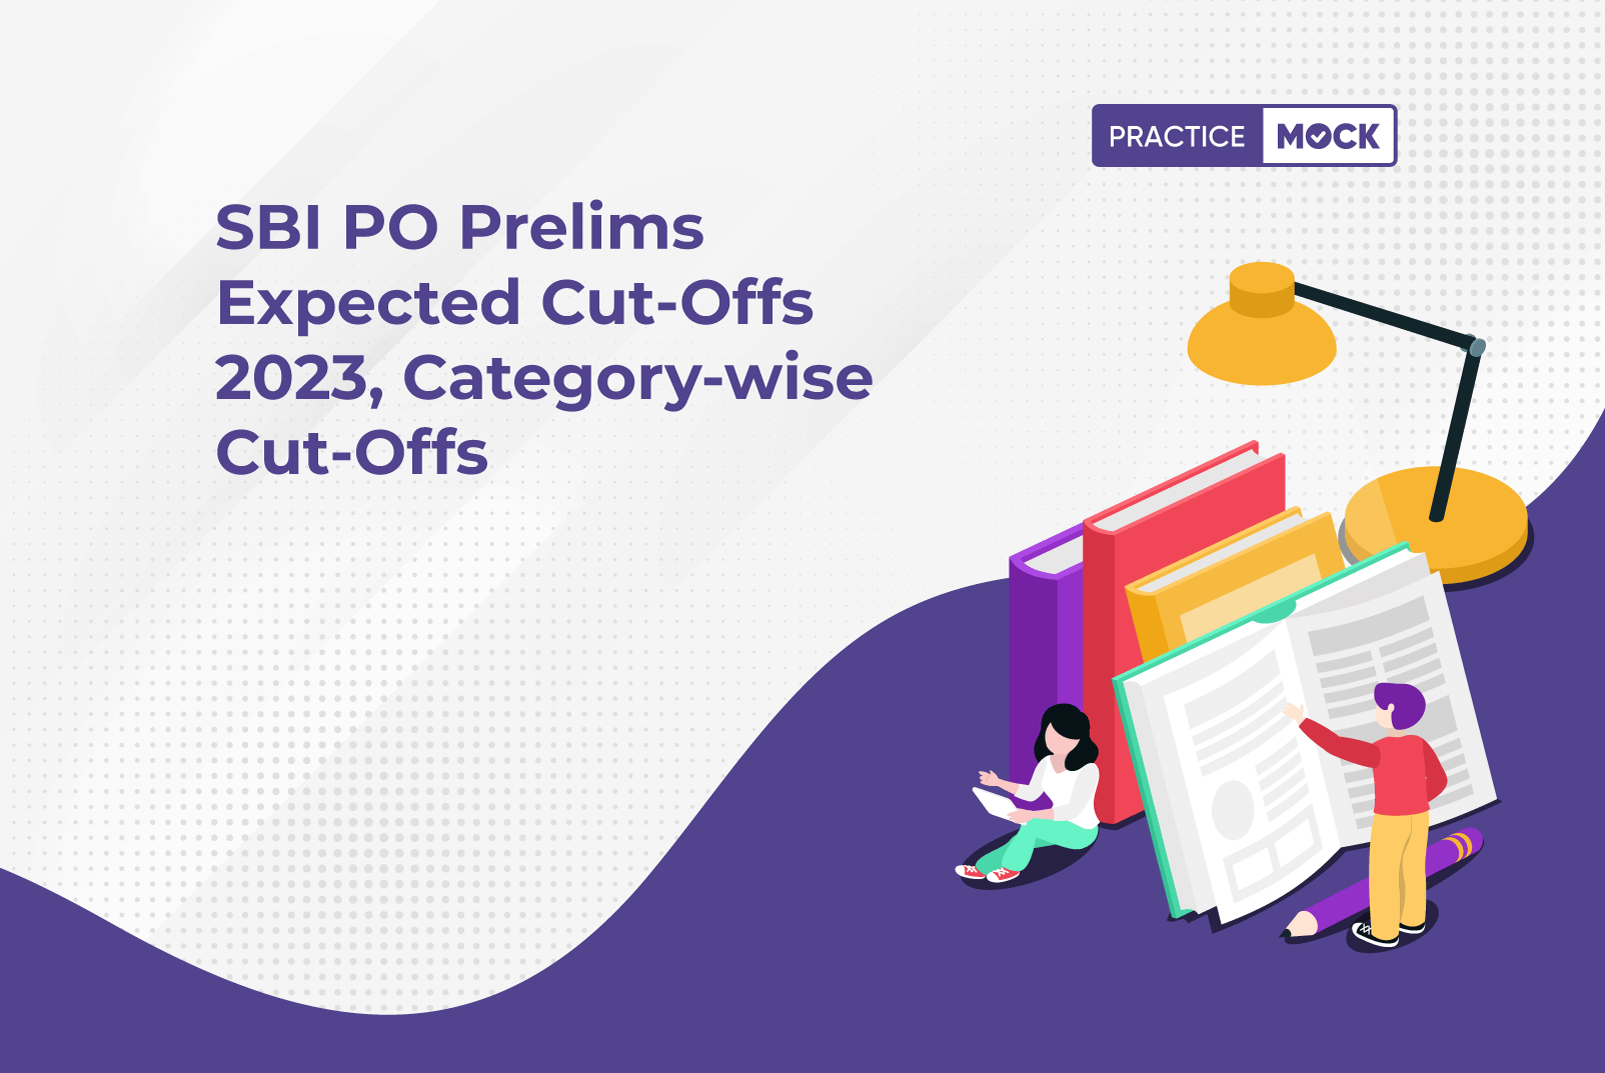 SBI PO Prelims Expected Cut-Offs 2023, Category-wise Cut-Offs (1)